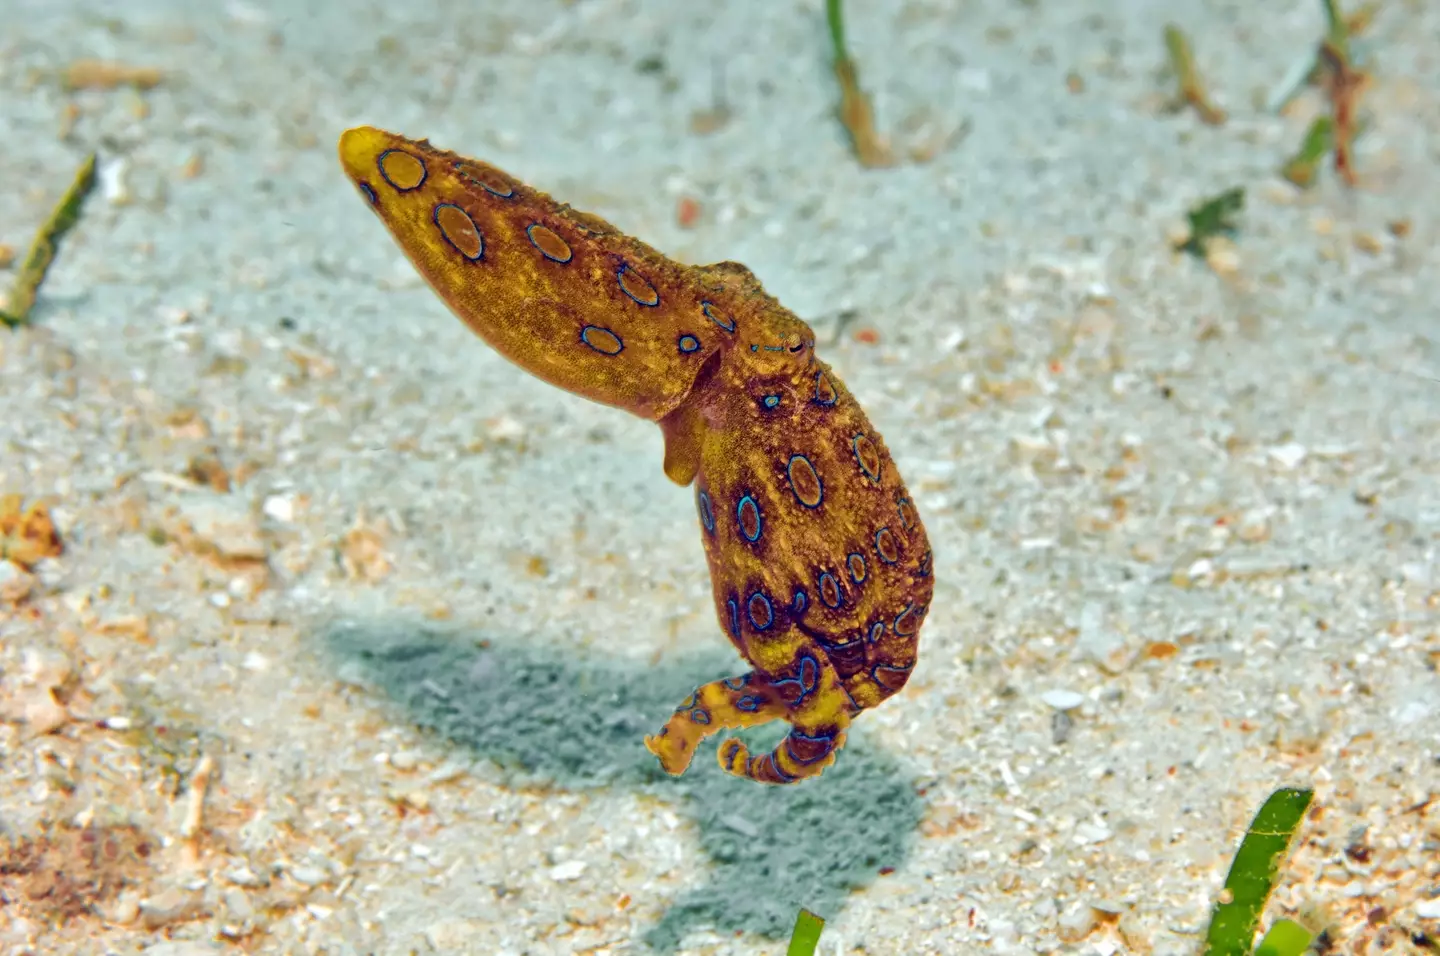 The creature is known as a blue-ringed octopus.